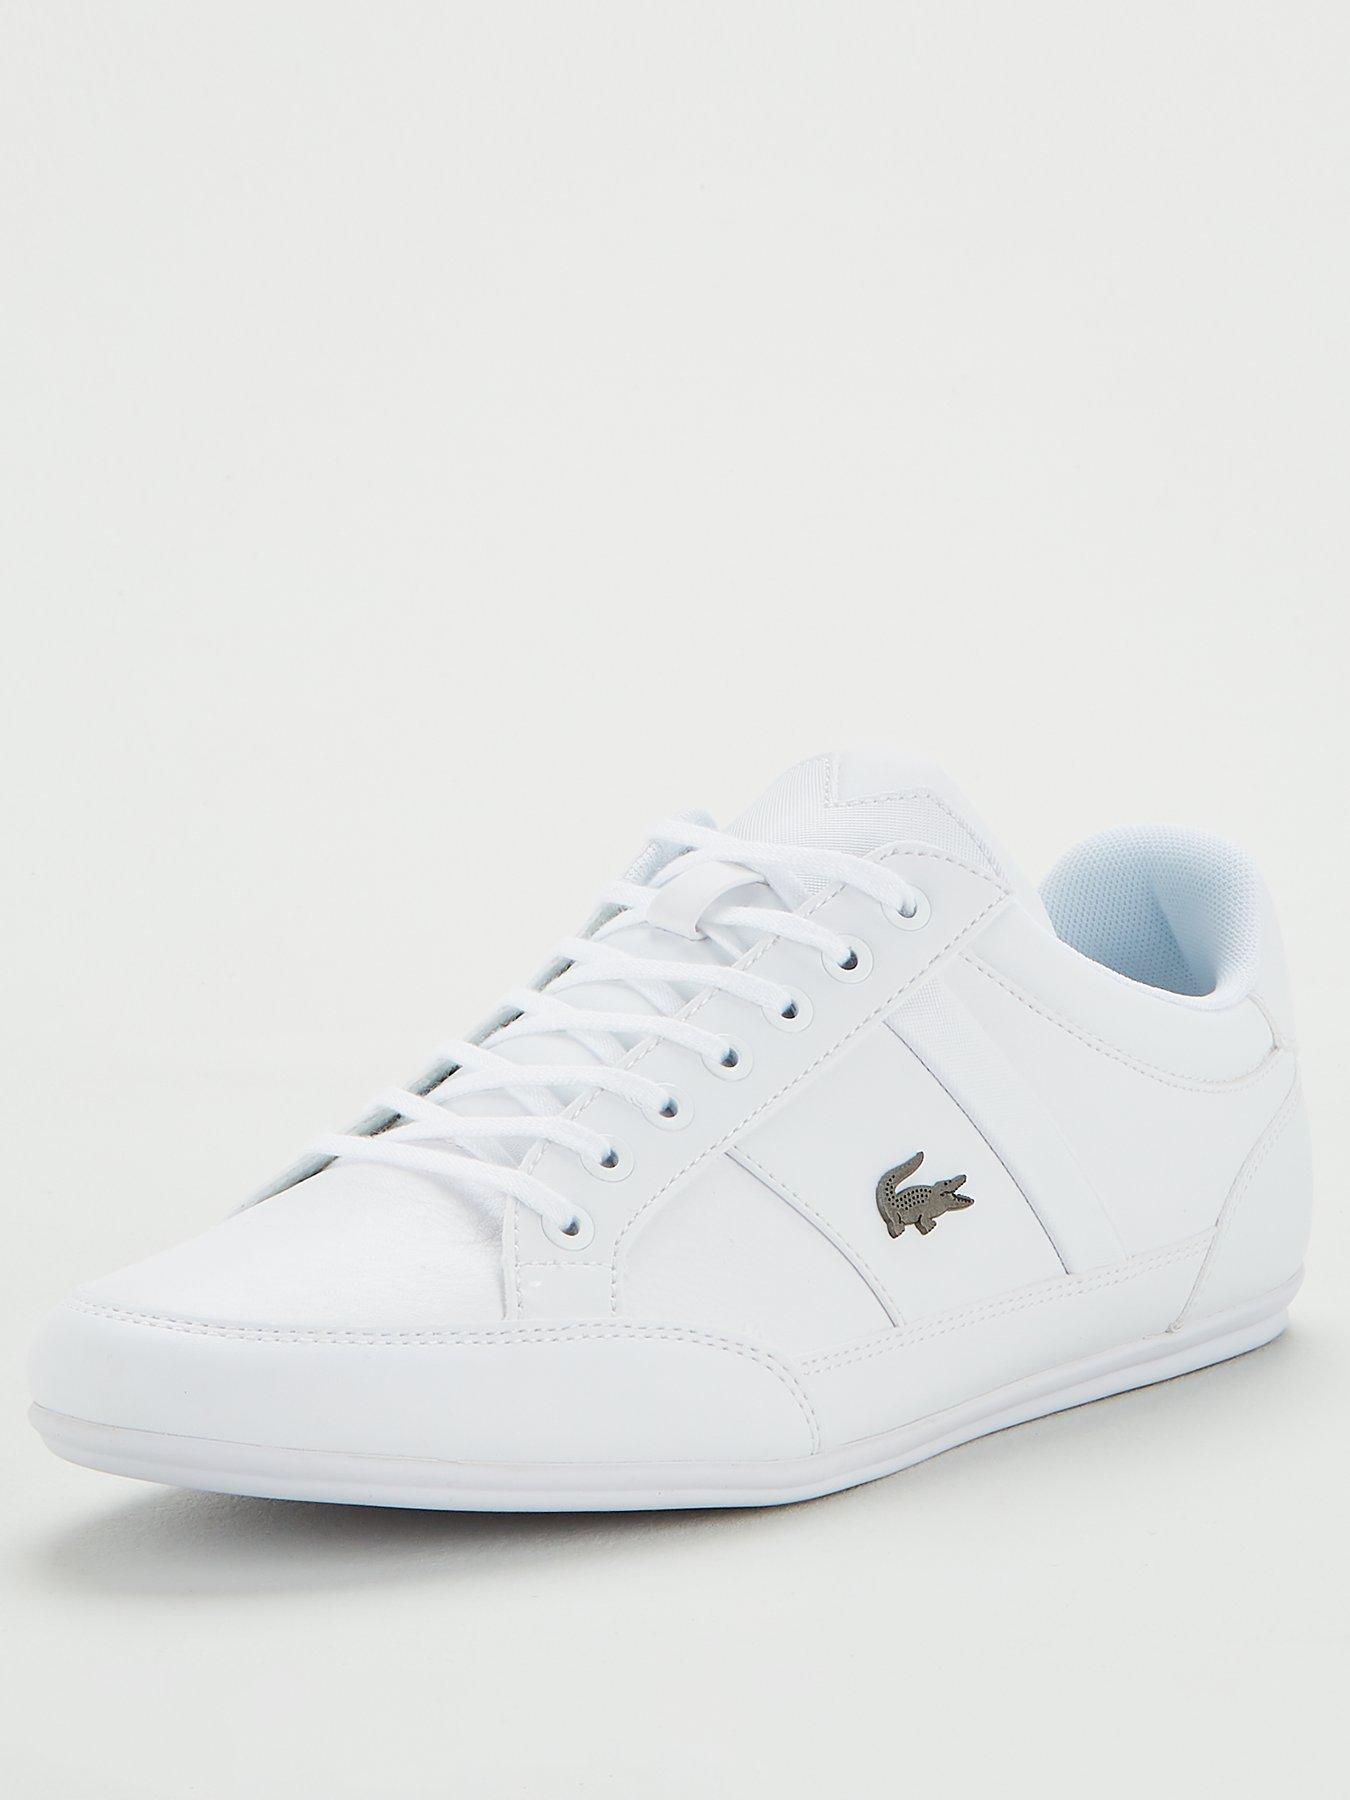 Lacoste Chaymon Leather Trainers 